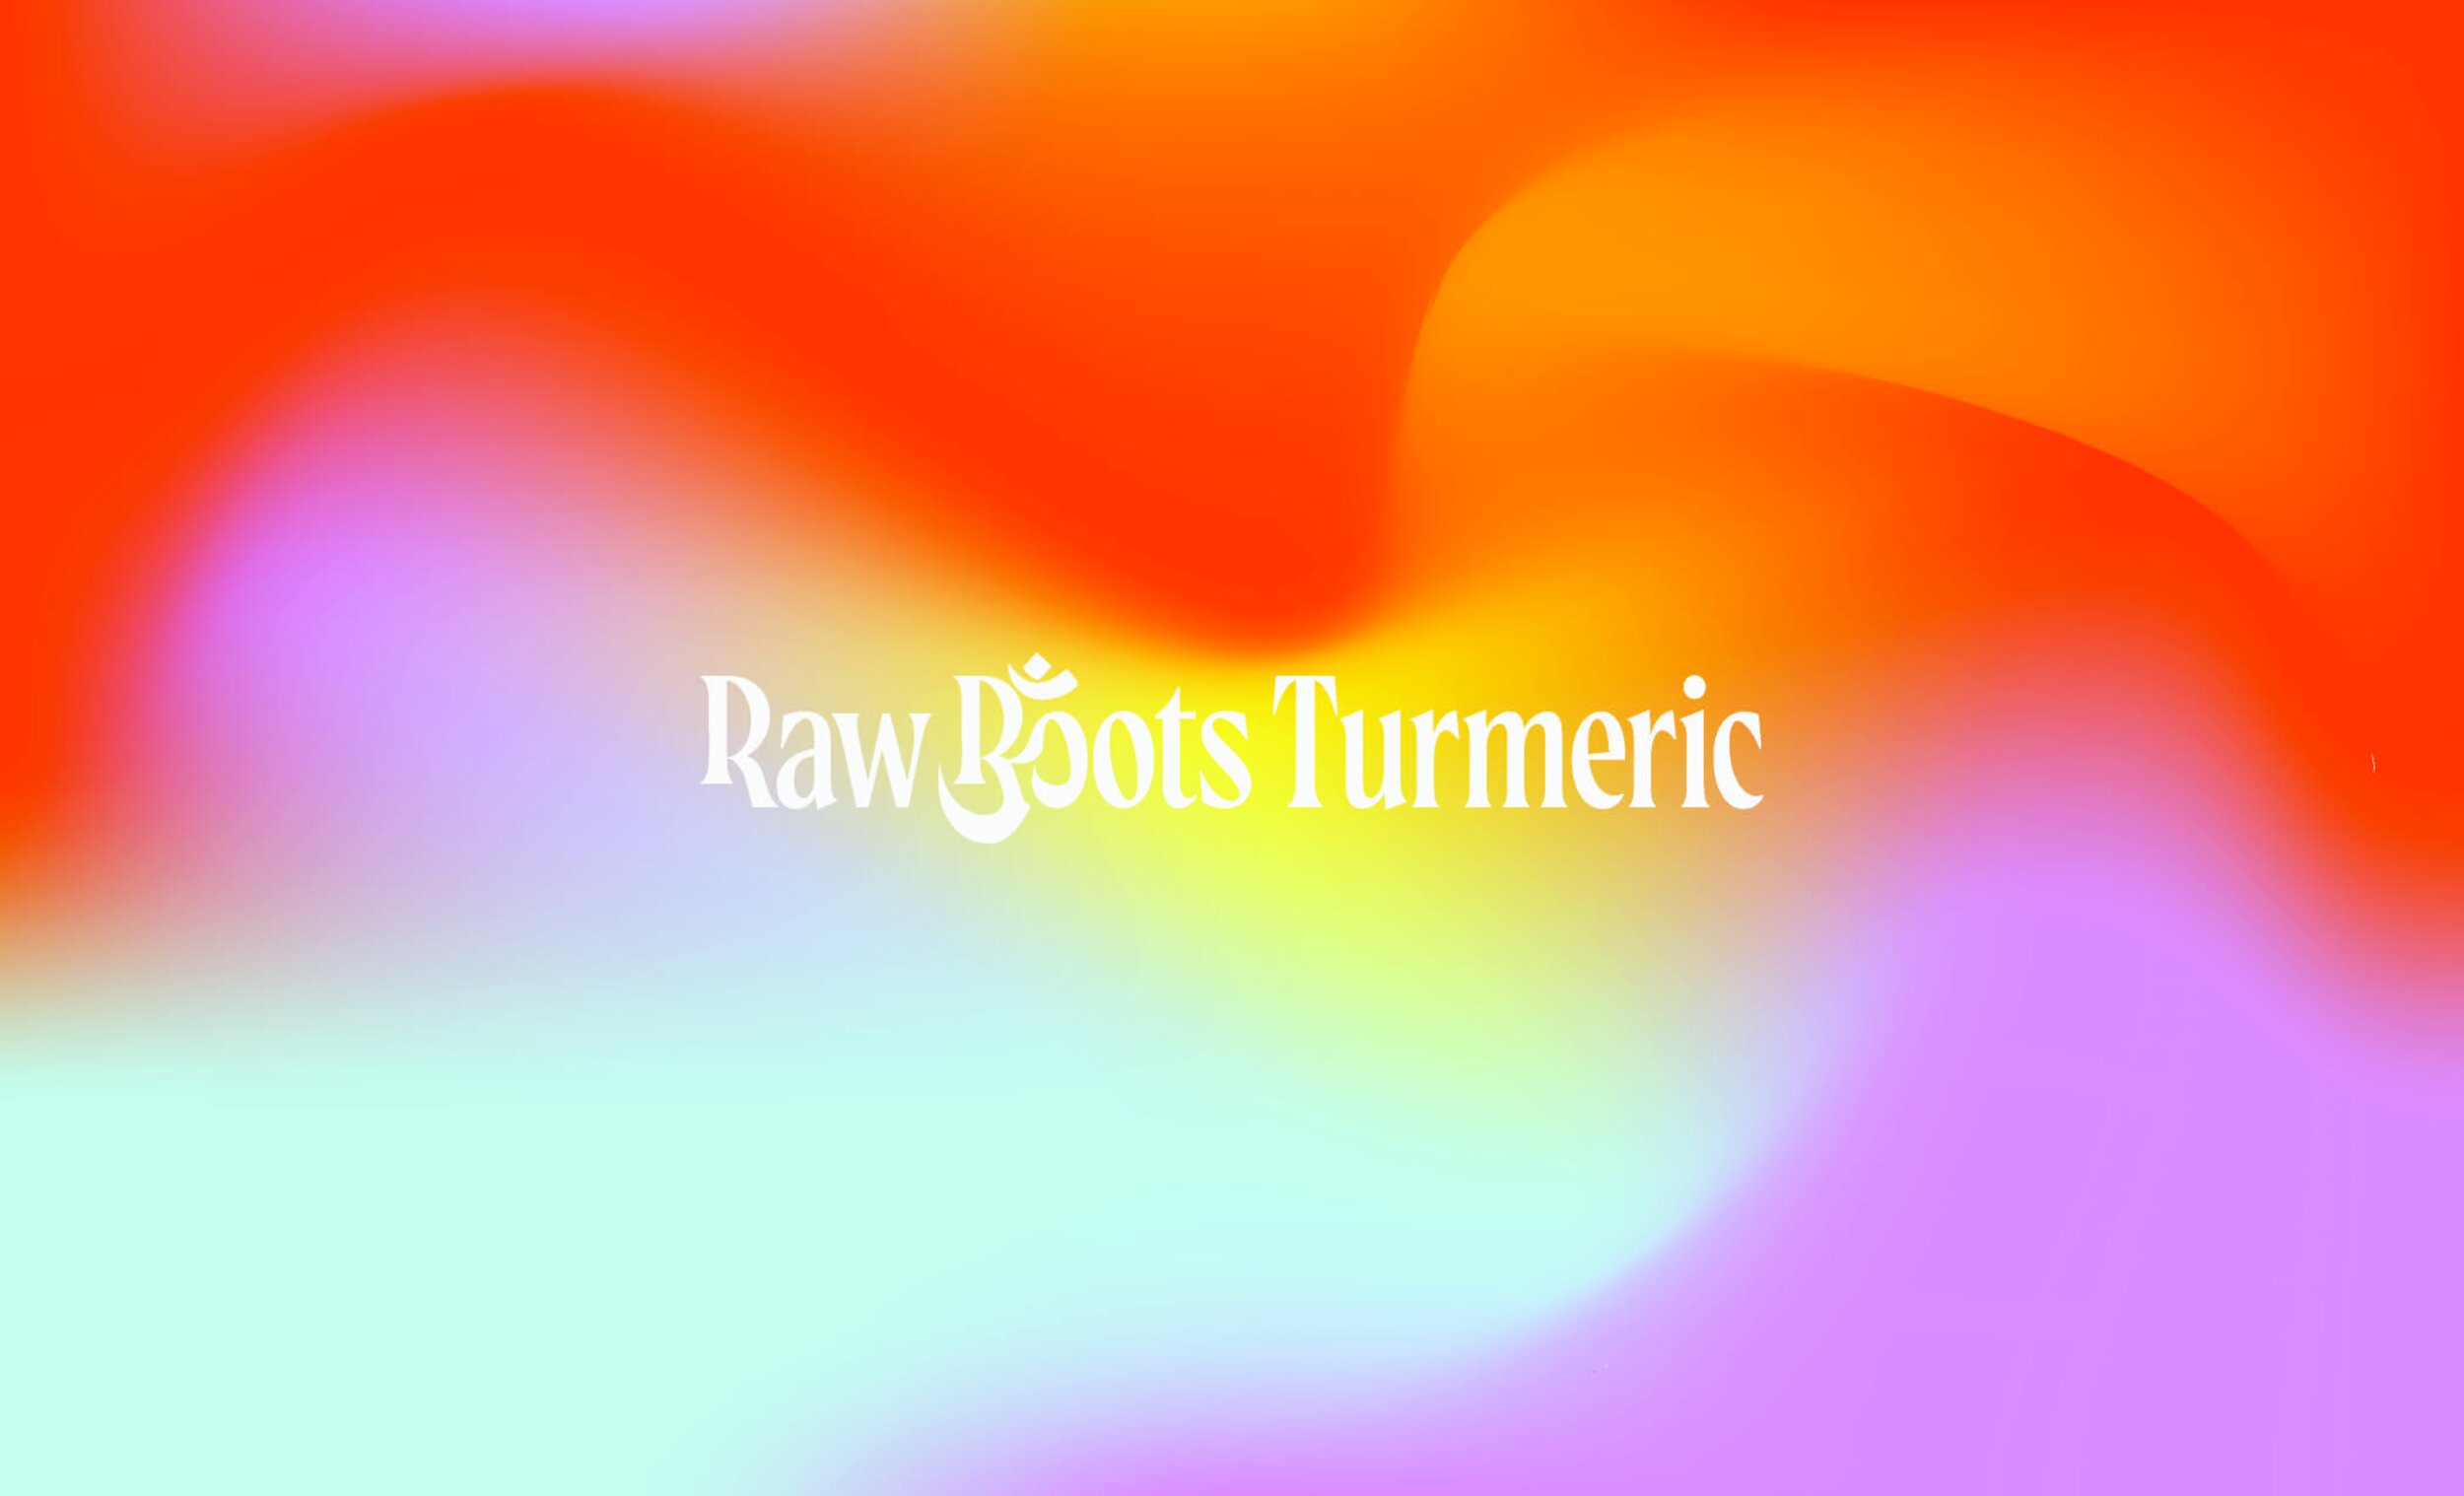  Raw Roots Turmeric farm logo with colorful gradient background. 